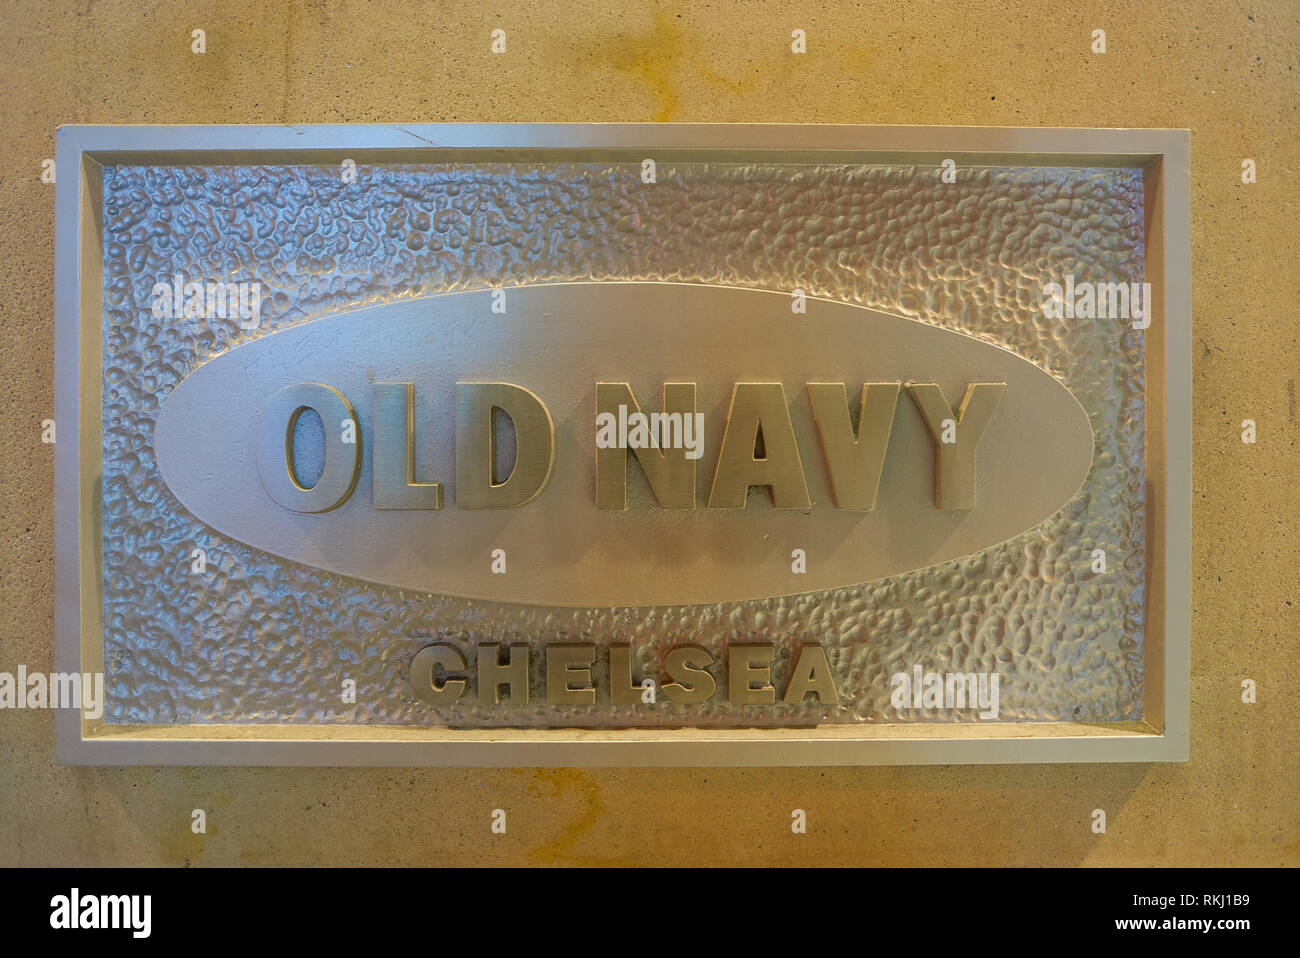 NEW YORK - MARCH 18, 2016: close up shot of Old Navy signboard. Old Navy is an American clothing and accessories retailer owned by American multinatio Stock Photo